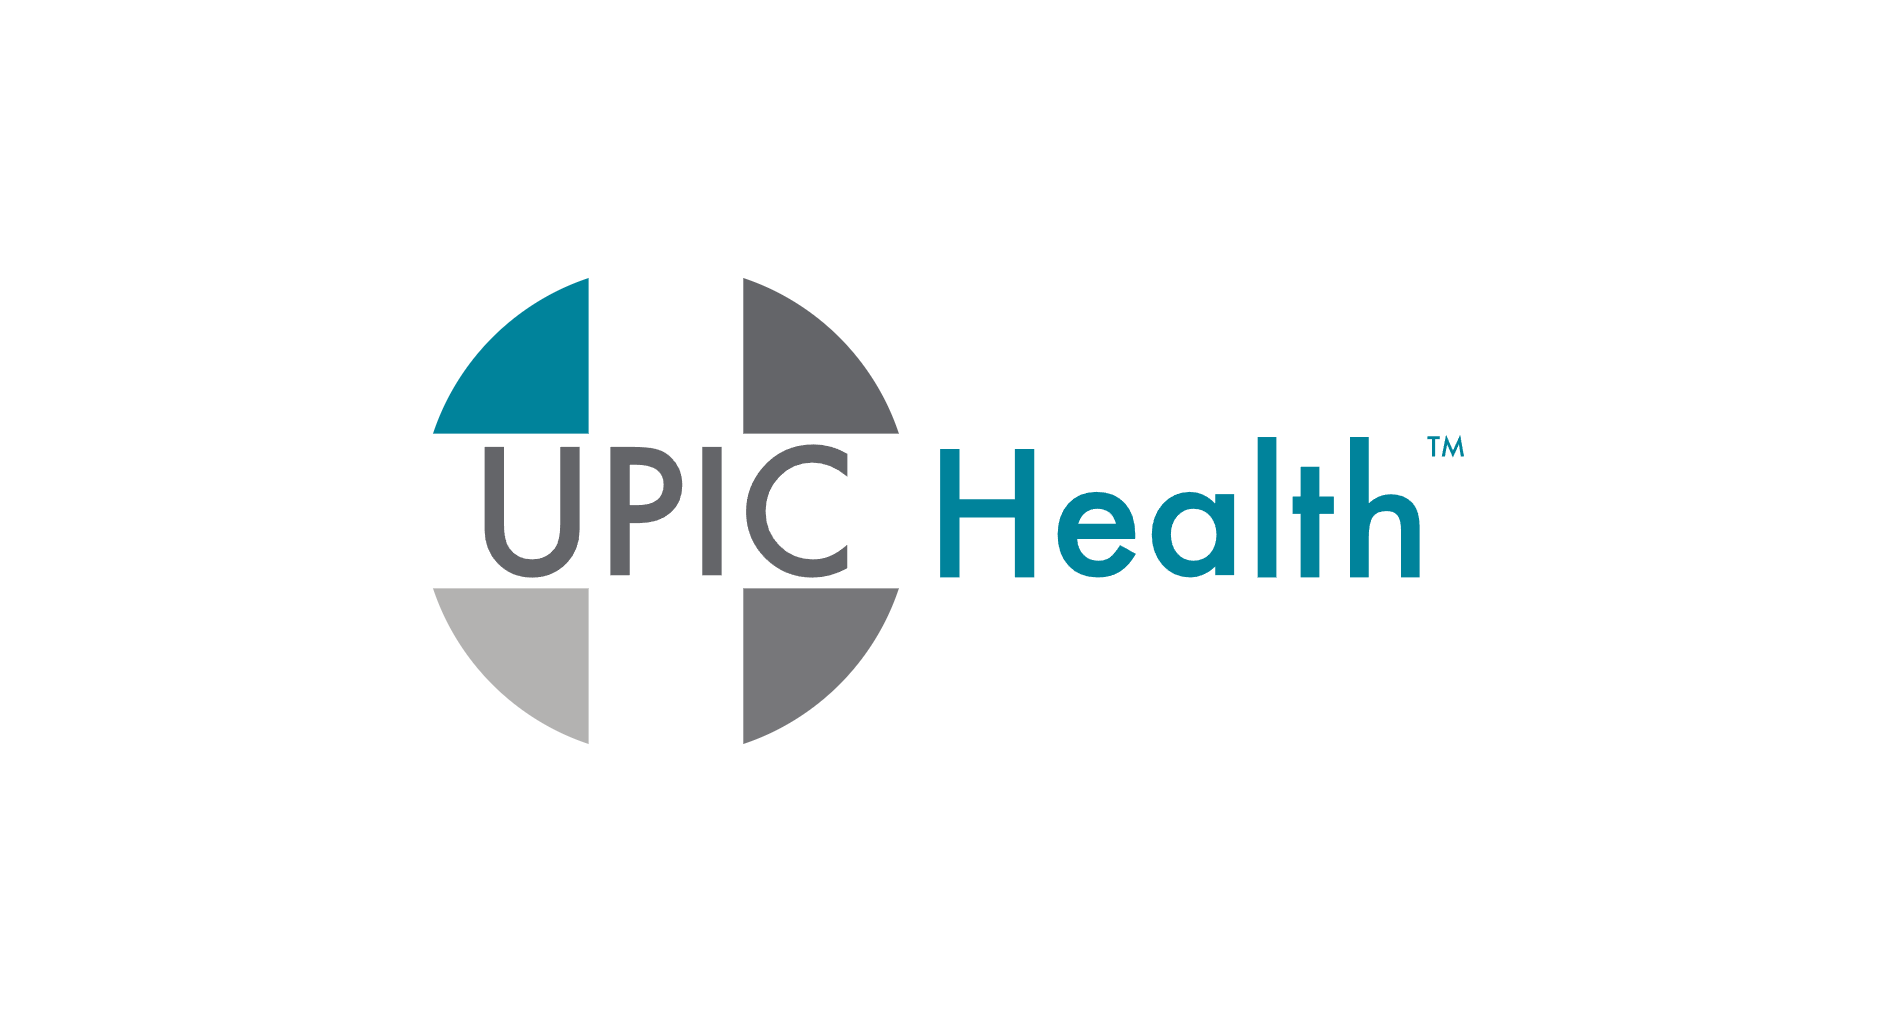 Access, Claims, and After Care Support - UPIC Health